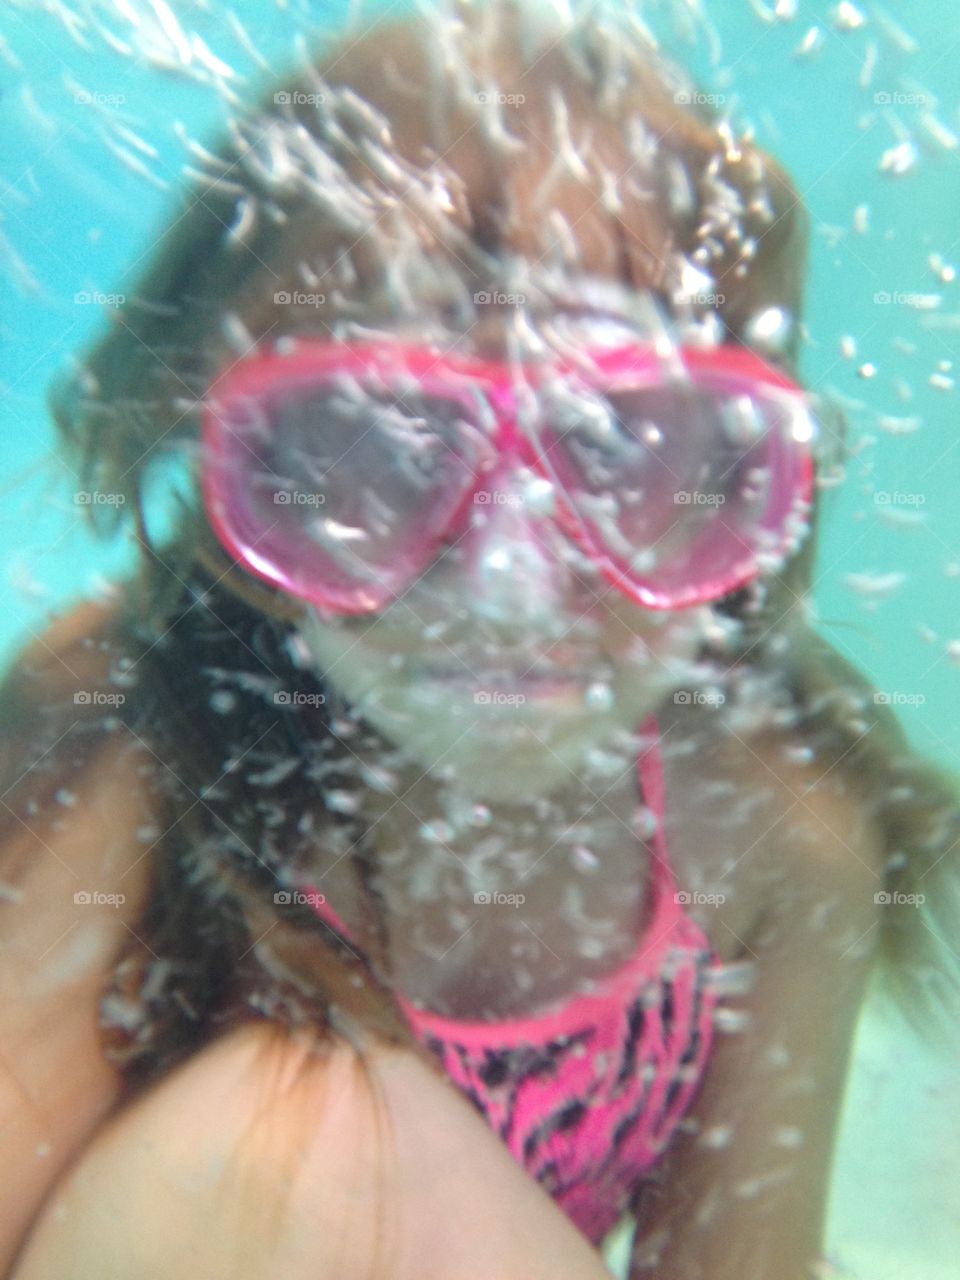 Behind the bubbles. Underwater view of a girl swimming and bubbles in a pool